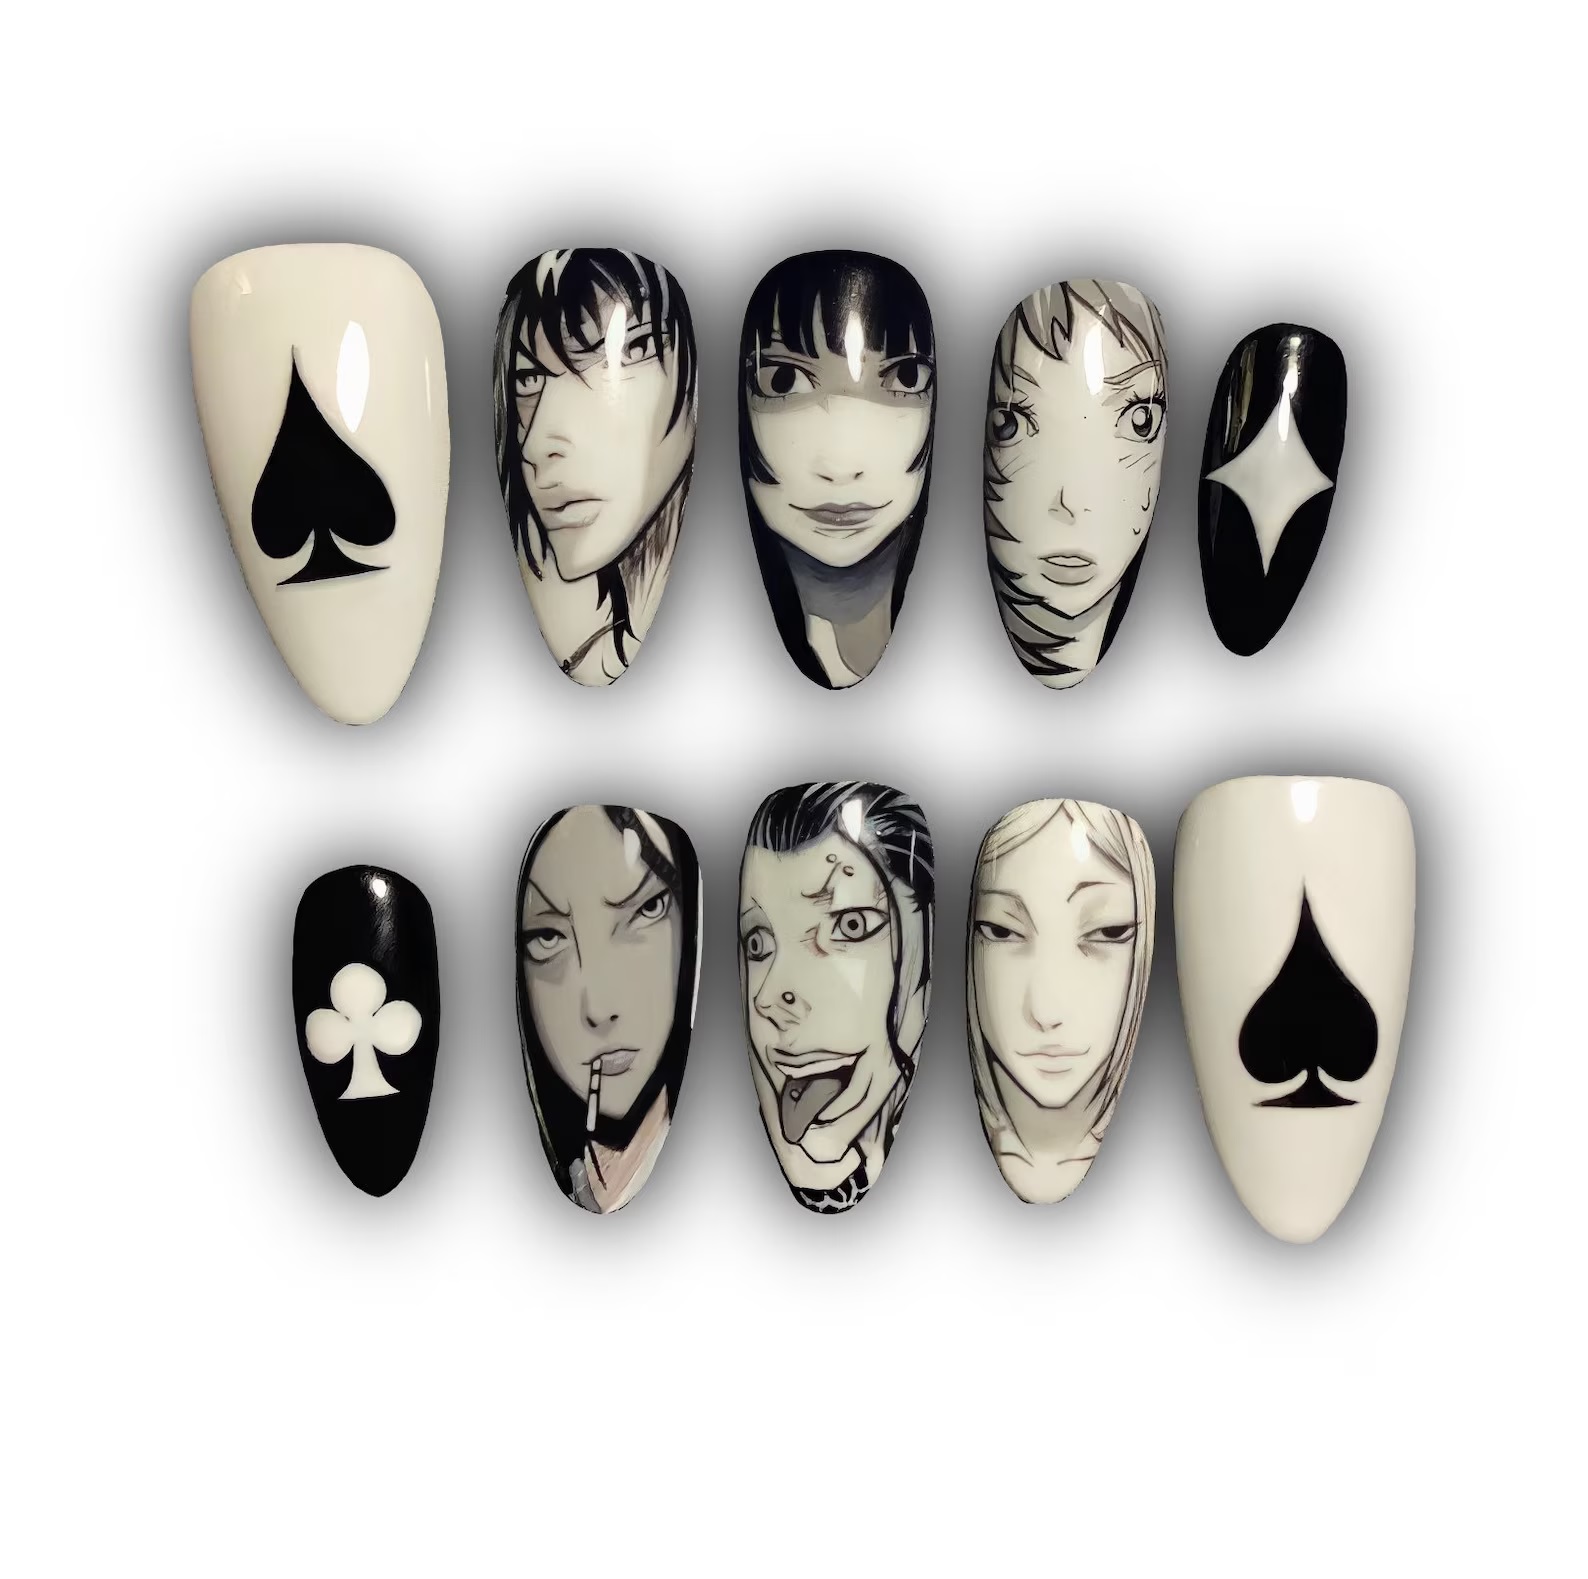 A set of black-and-white fake nails, each with a different character or symbol taken from the manga/anime Alice in Borderland